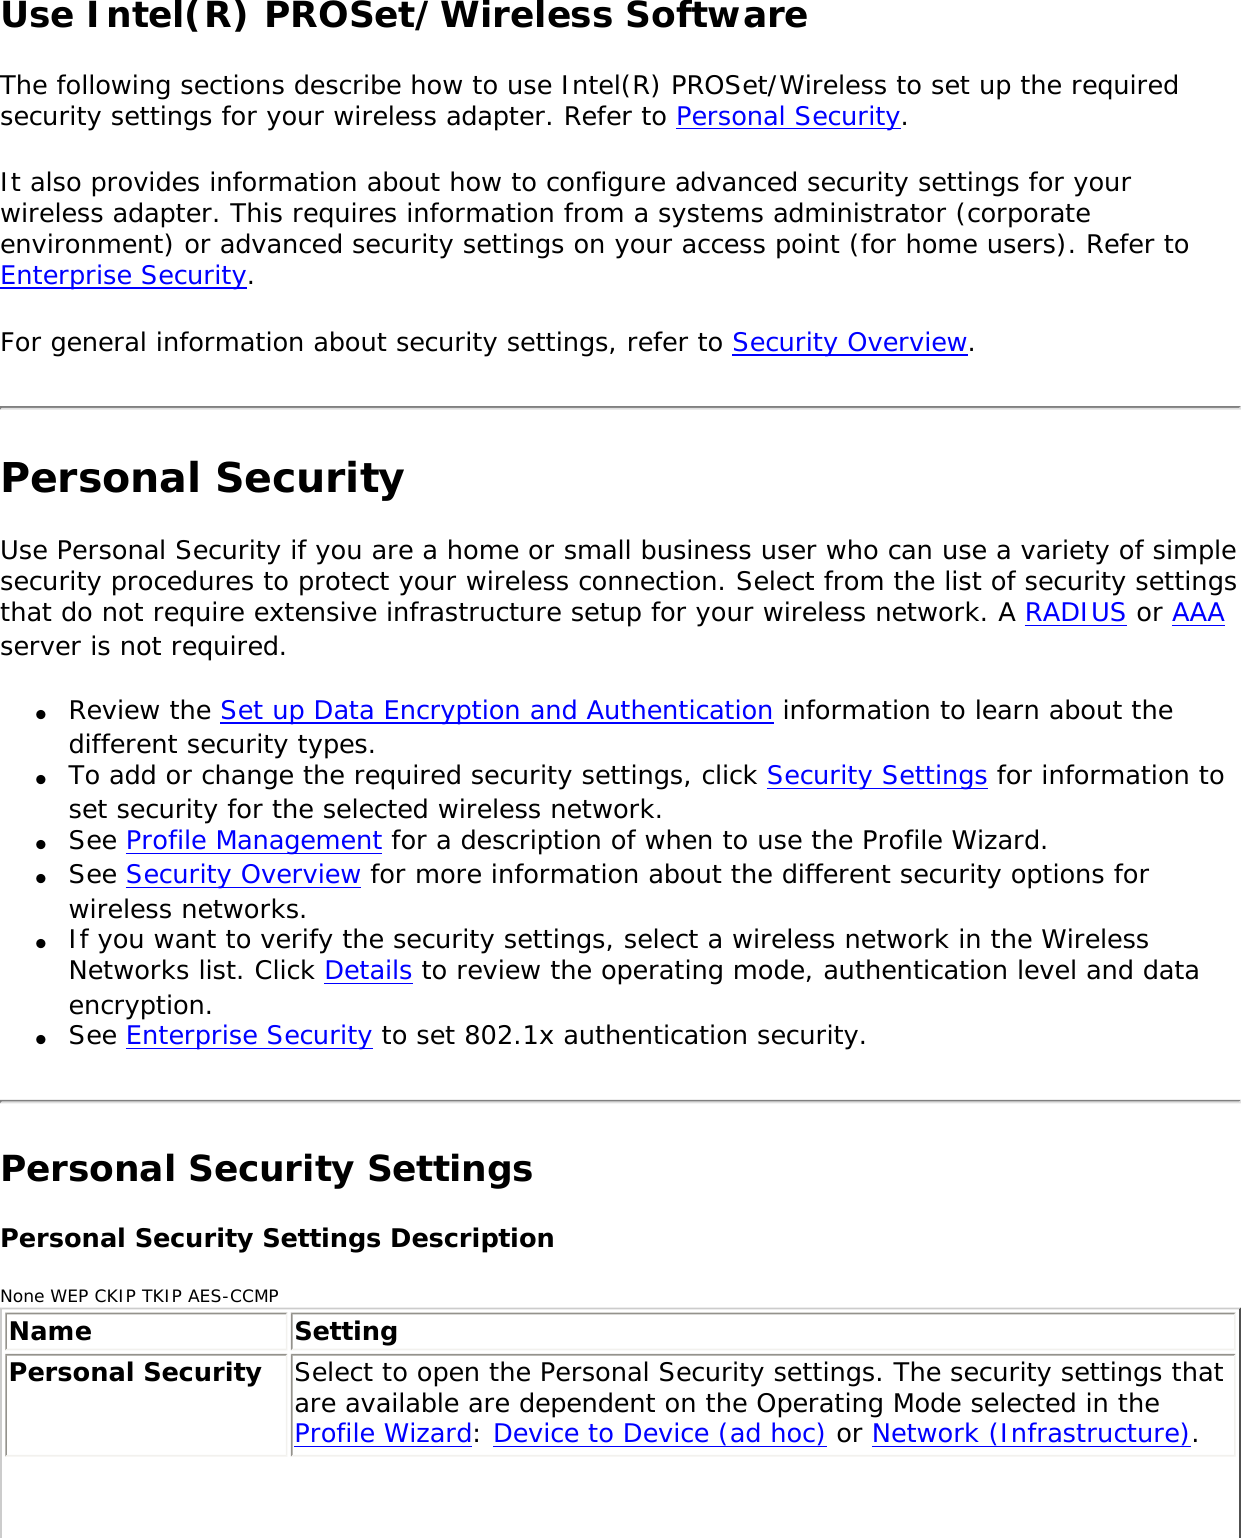 Use Intel(R) PROSet/Wireless Software The following sections describe how to use Intel(R) PROSet/Wireless to set up the required security settings for your wireless adapter. Refer to Personal Security. It also provides information about how to configure advanced security settings for your wireless adapter. This requires information from a systems administrator (corporate environment) or advanced security settings on your access point (for home users). Refer to Enterprise Security. For general information about security settings, refer to Security Overview. Personal SecurityUse Personal Security if you are a home or small business user who can use a variety of simple security procedures to protect your wireless connection. Select from the list of security settings that do not require extensive infrastructure setup for your wireless network. A RADIUS or AAA server is not required. ●     Review the Set up Data Encryption and Authentication information to learn about the different security types.●     To add or change the required security settings, click Security Settings for information to set security for the selected wireless network. ●     See Profile Management for a description of when to use the Profile Wizard. ●     See Security Overview for more information about the different security options for wireless networks. ●     If you want to verify the security settings, select a wireless network in the Wireless Networks list. Click Details to review the operating mode, authentication level and data encryption. ●     See Enterprise Security to set 802.1x authentication security. Personal Security Settings Personal Security Settings DescriptionNone WEP CKIP TKIP AES-CCMPName SettingPersonal Security  Select to open the Personal Security settings. The security settings that are available are dependent on the Operating Mode selected in the Profile Wizard: Device to Device (ad hoc) or Network (Infrastructure). 